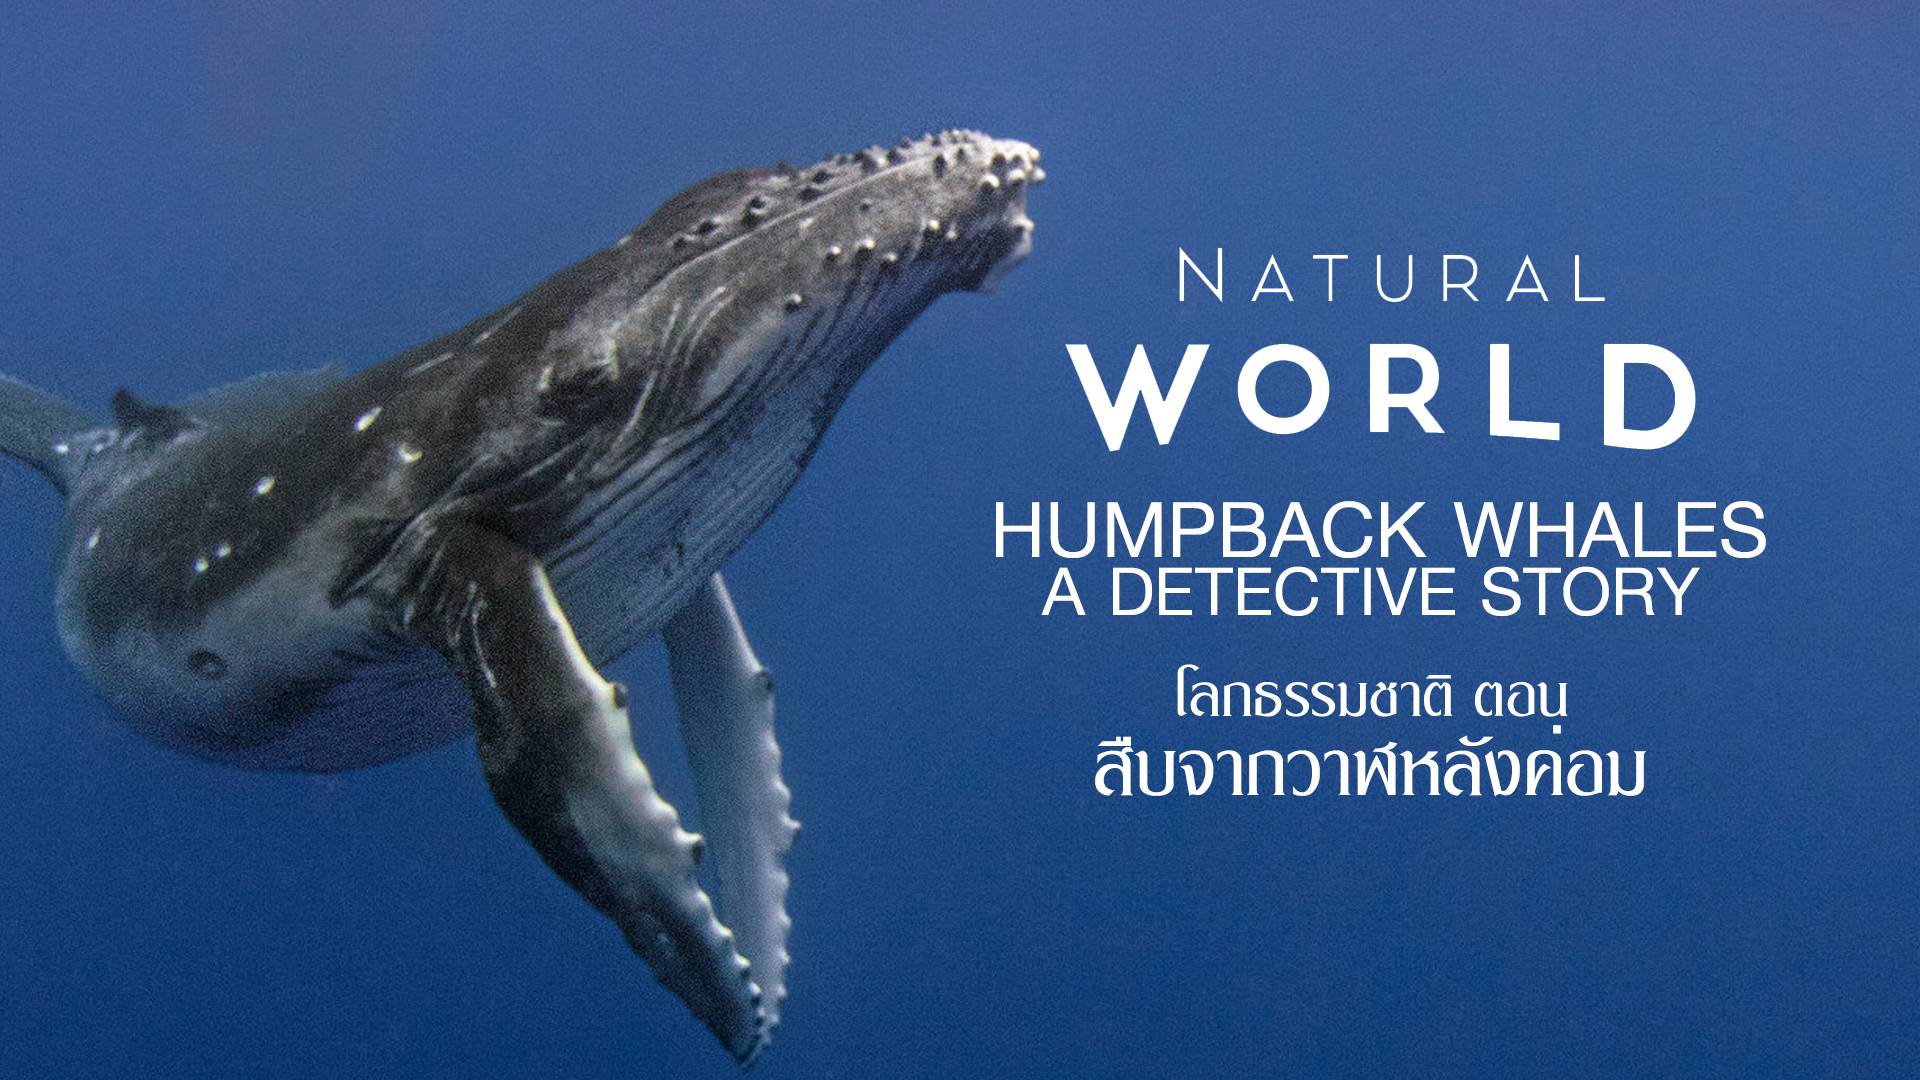 Natural World Humpback Whales A Detective Story Watch Movies Online